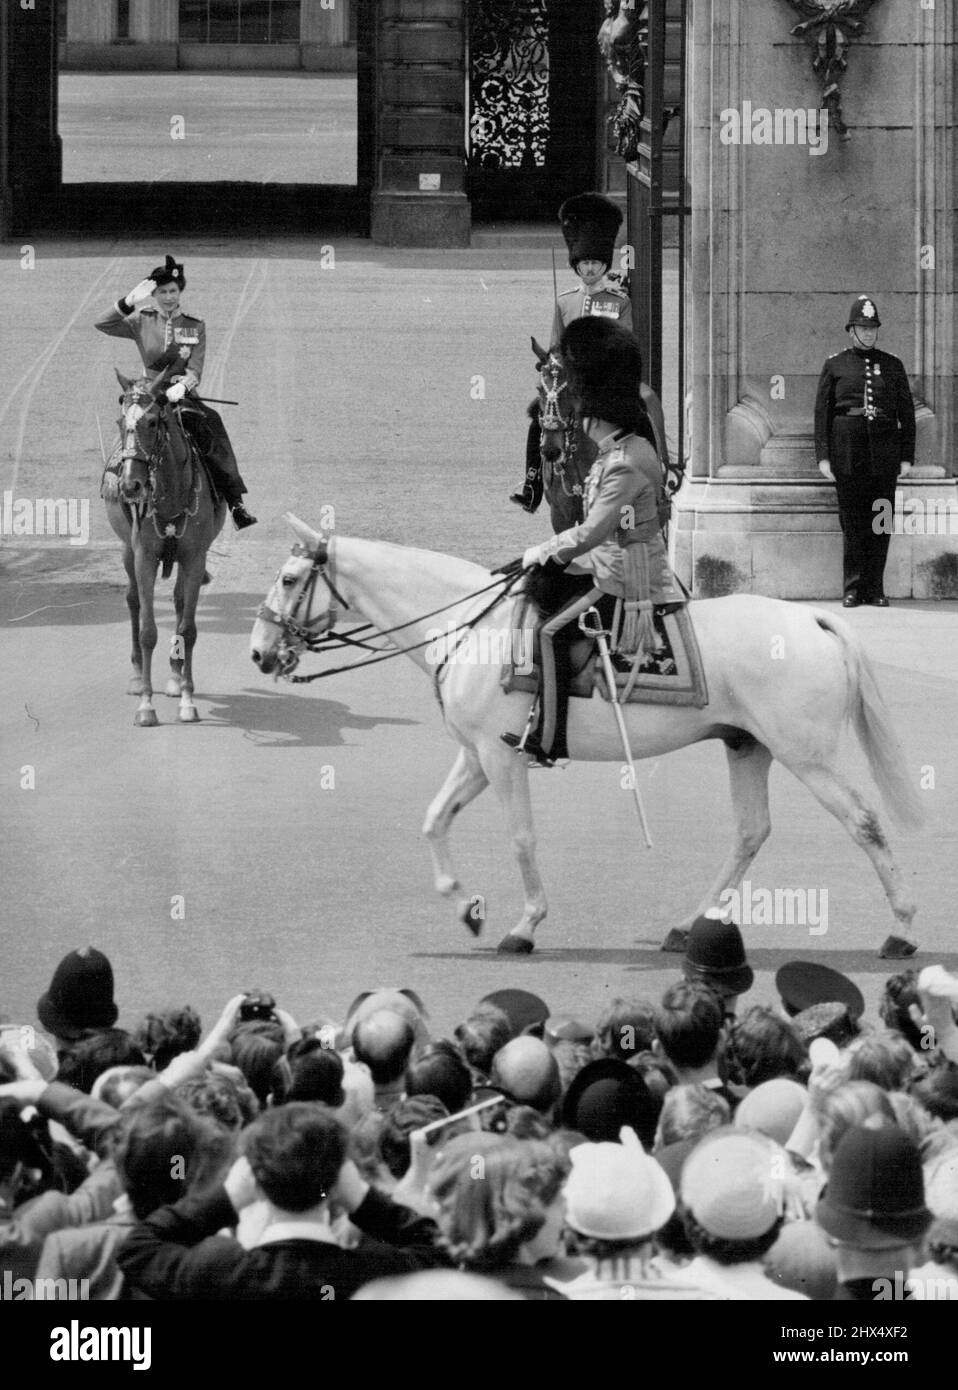 Queen Saluted By Her Uncle At The Palace- The Queen returns the salute of her uncle, the Duke of Gloucester outside Buckingham palace, London, to-day (Thursday) when the guards marched past the Queen after the Trooping the Colour ceremony, in celebration of her official birthday, on the horse guards parade. June 5, 1952. (Photo by Reuterphoto). Stock Photo